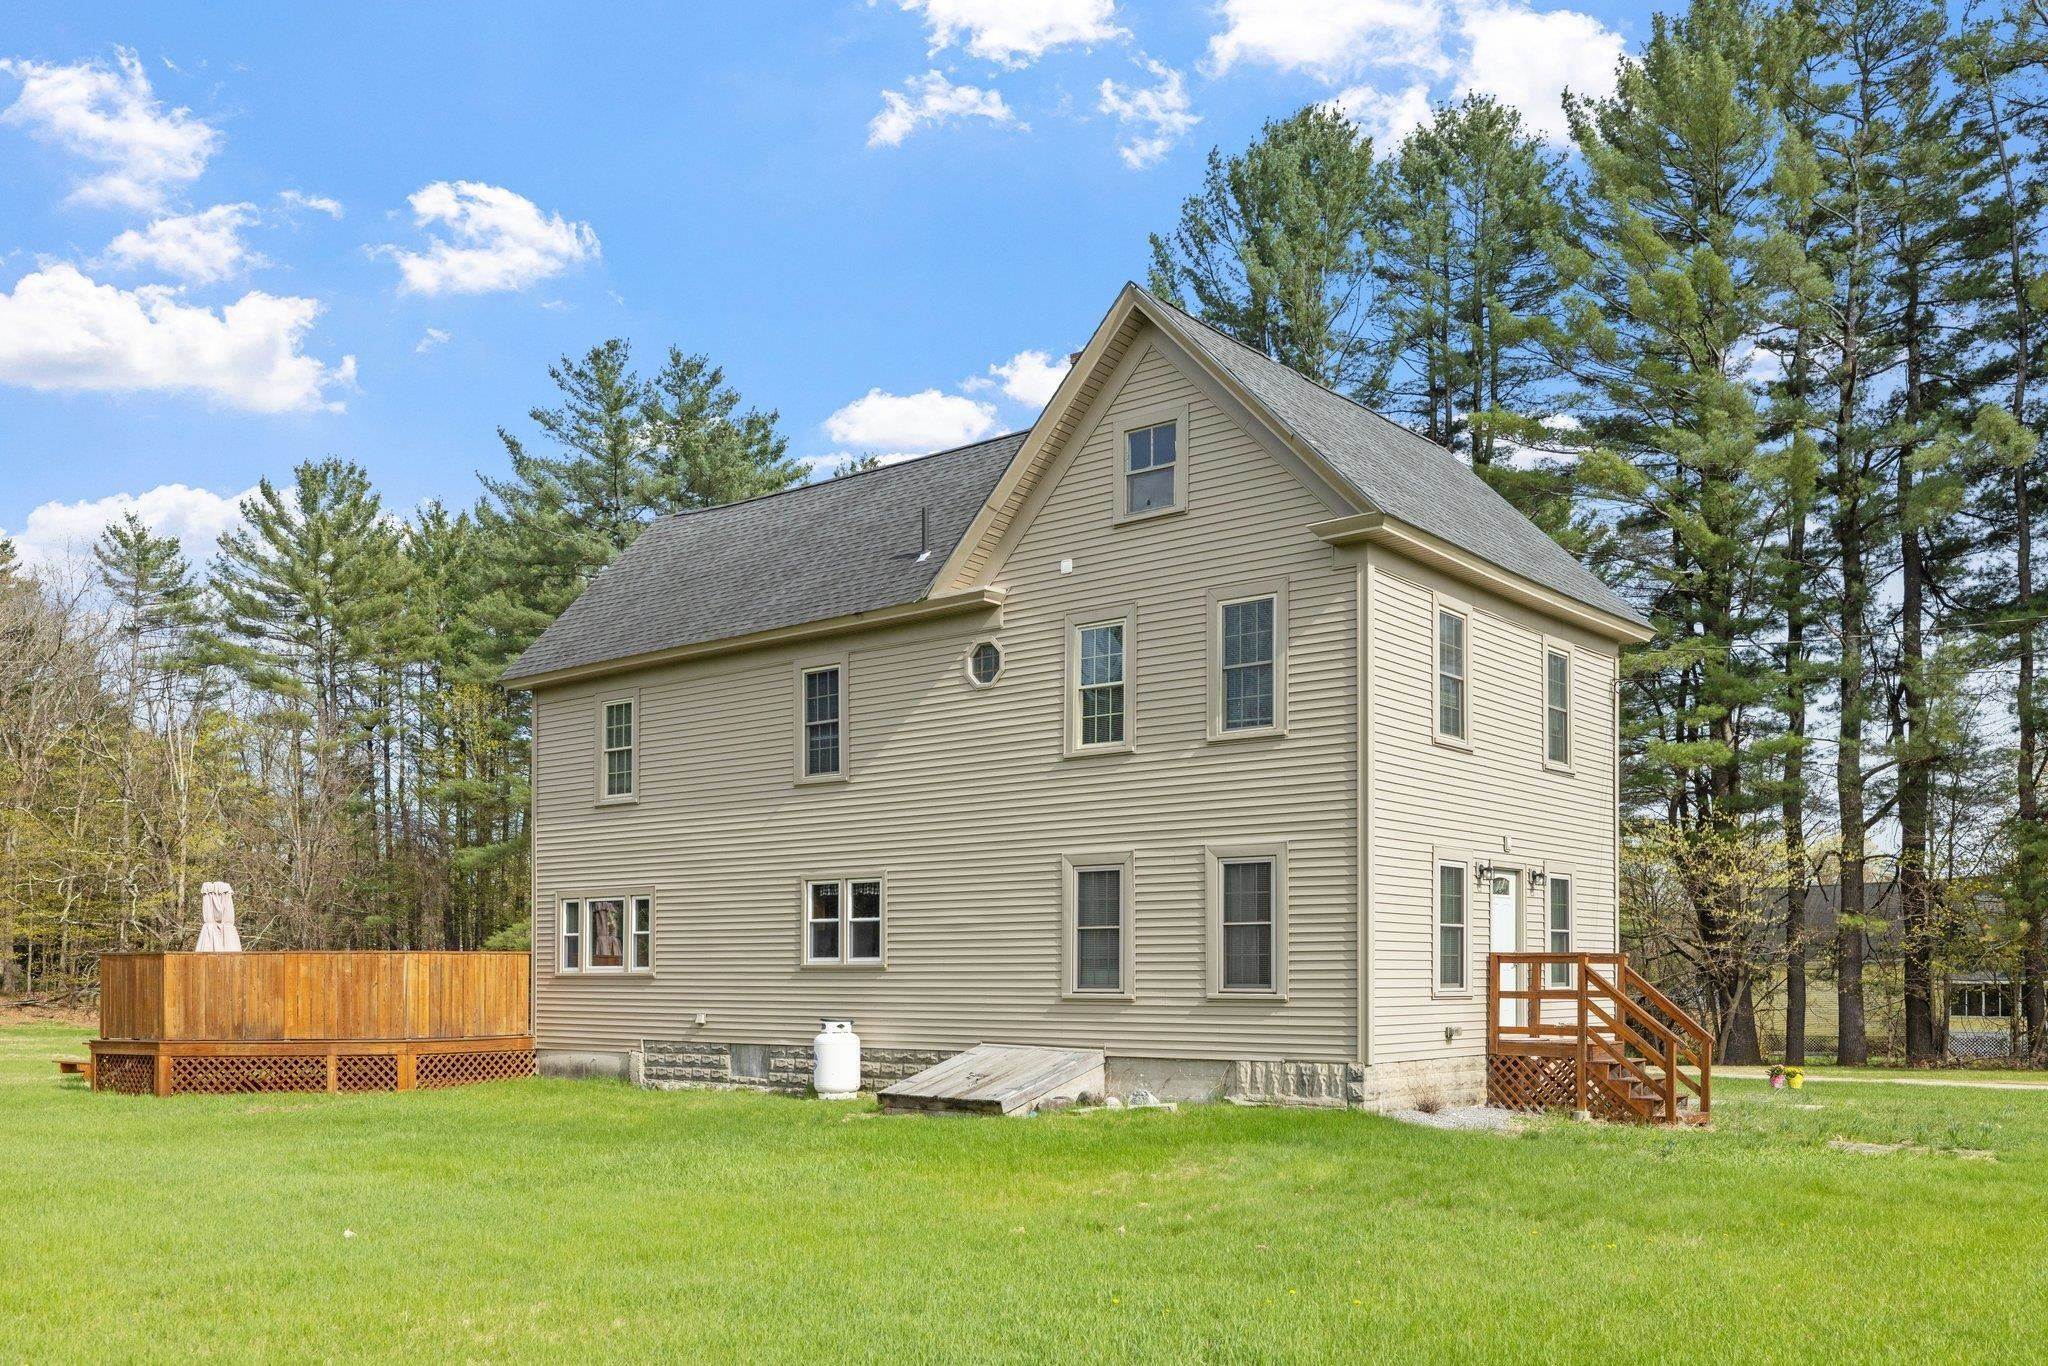 2. Single Family Homes for Sale at Hopkinton, NH 03229